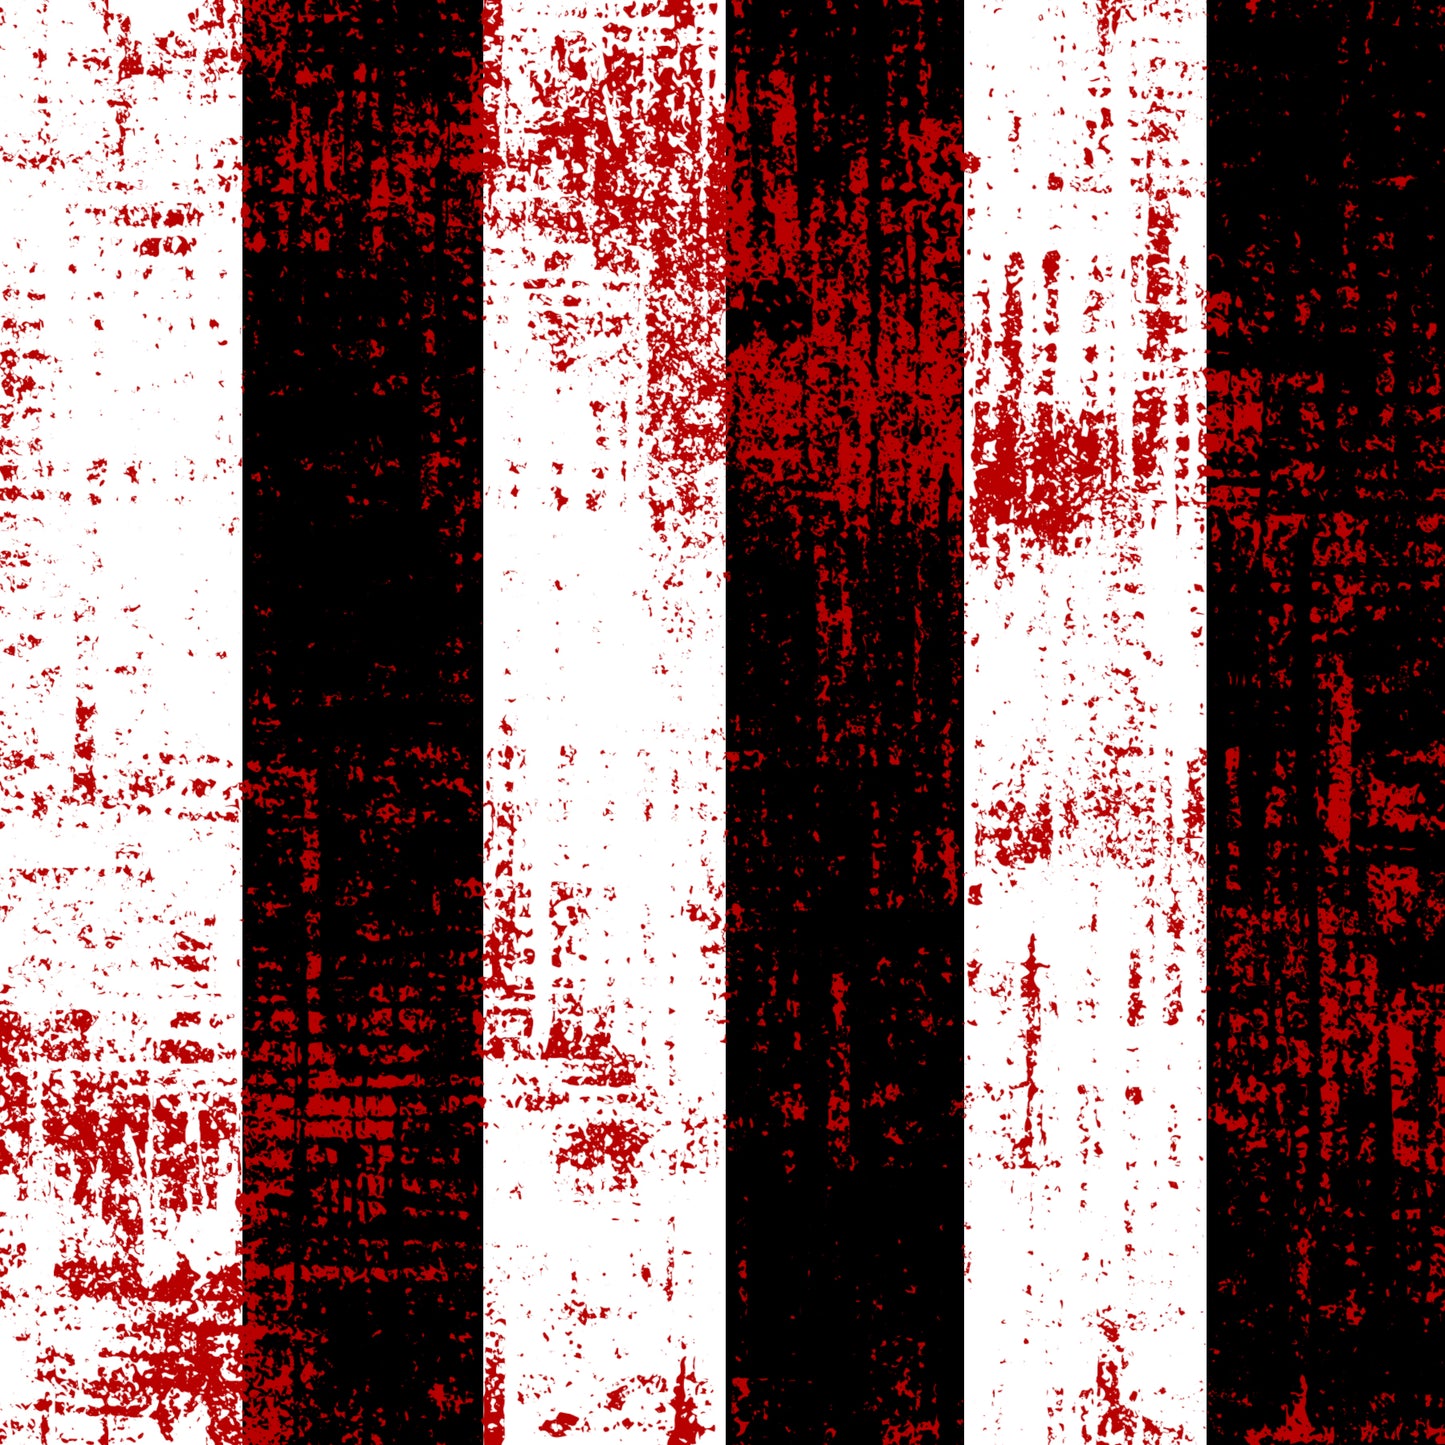 Stripes and Blood